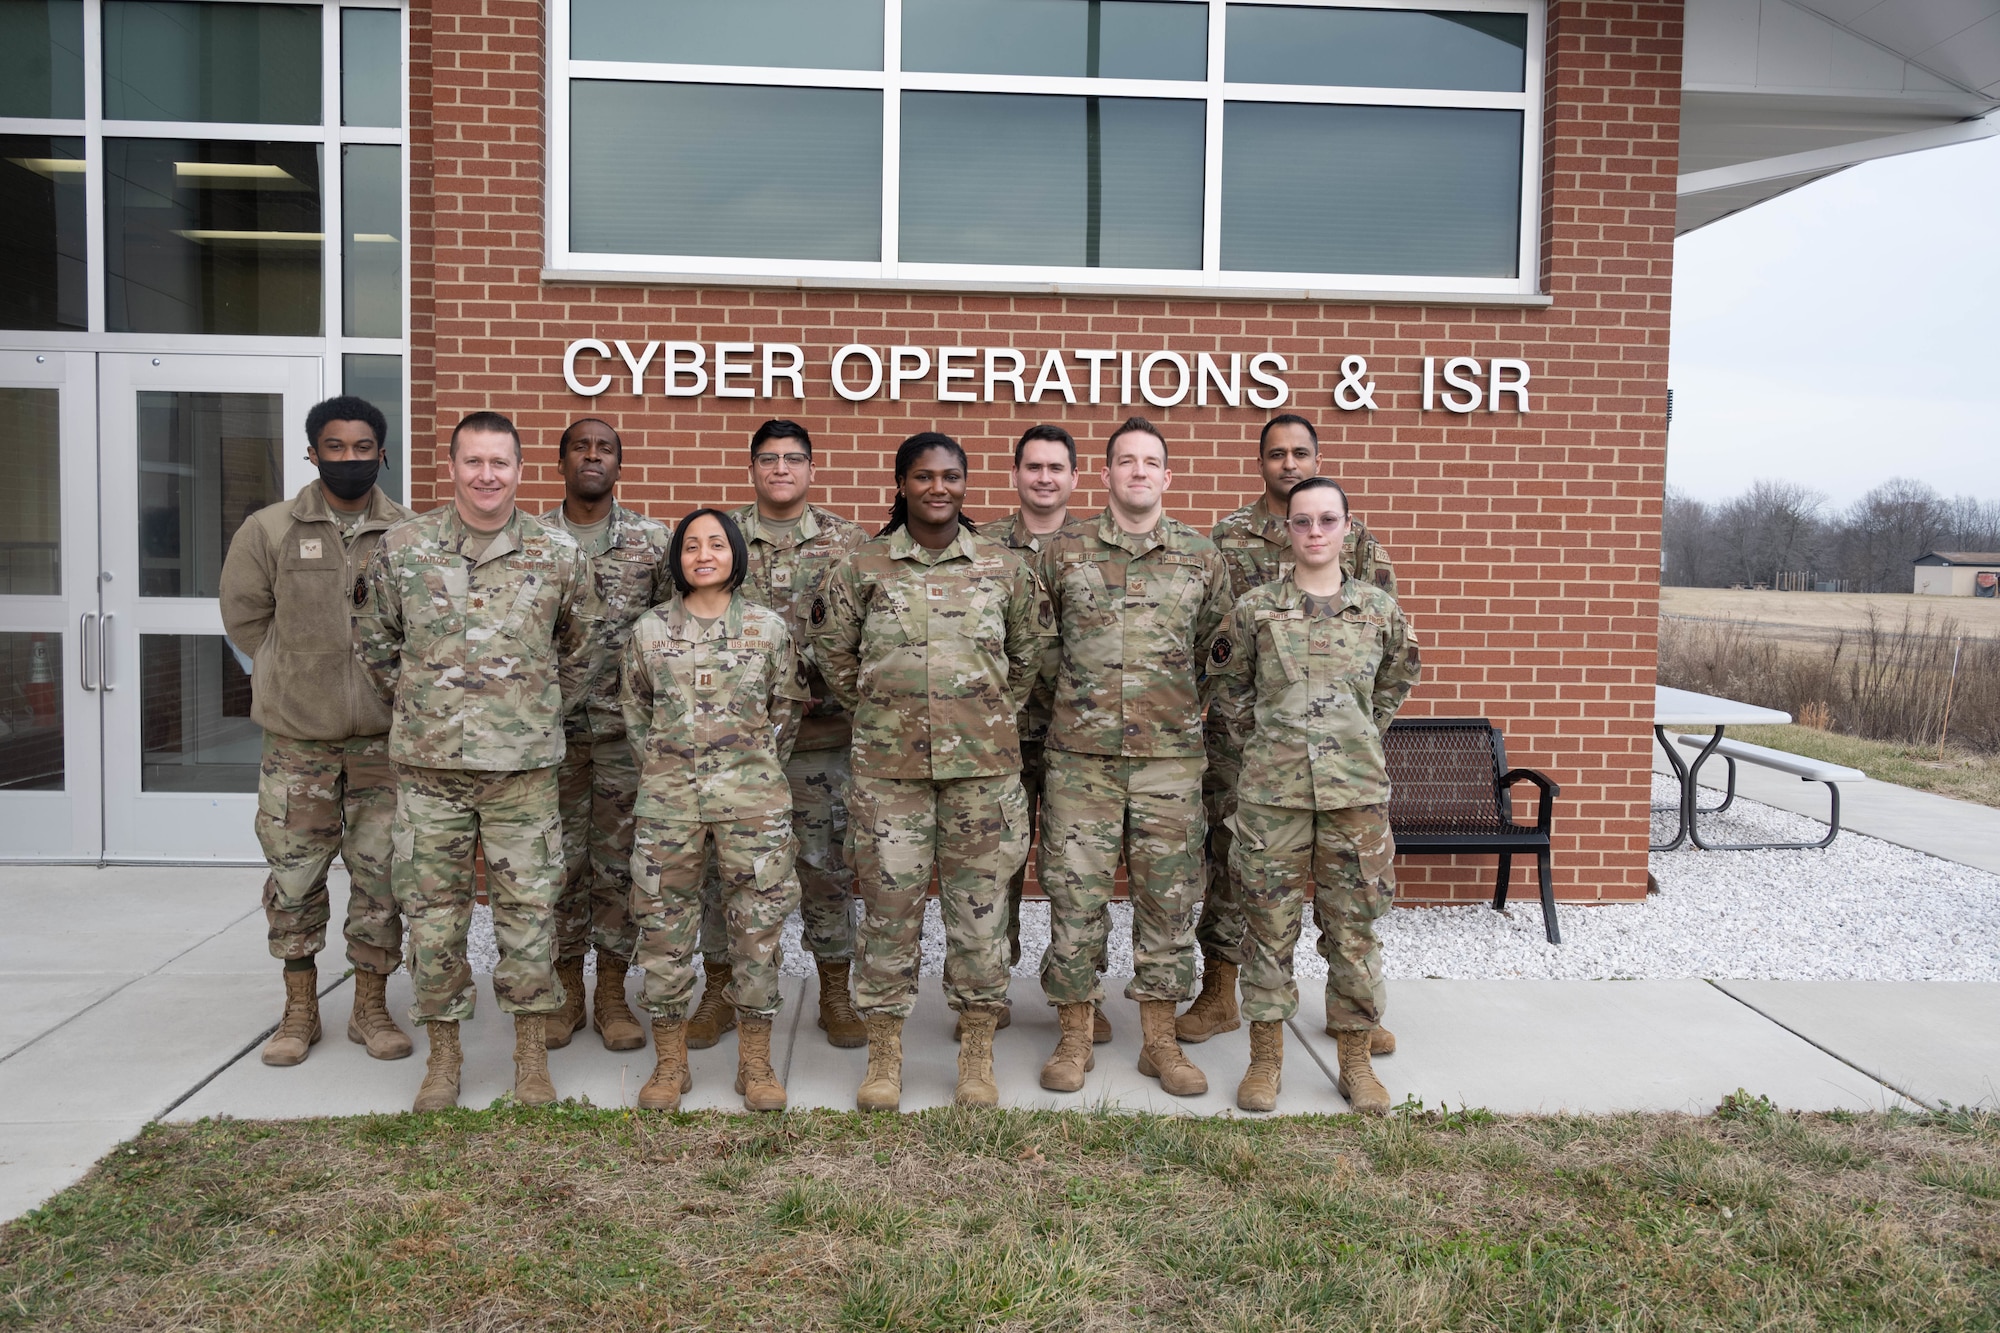 Airmen assigned to the 275th Cyberspace Operations Squadron pose for a photograph at Warfield Air National Guard Base at Martin State Airport, Middle River, Md., on January 10, 2023.